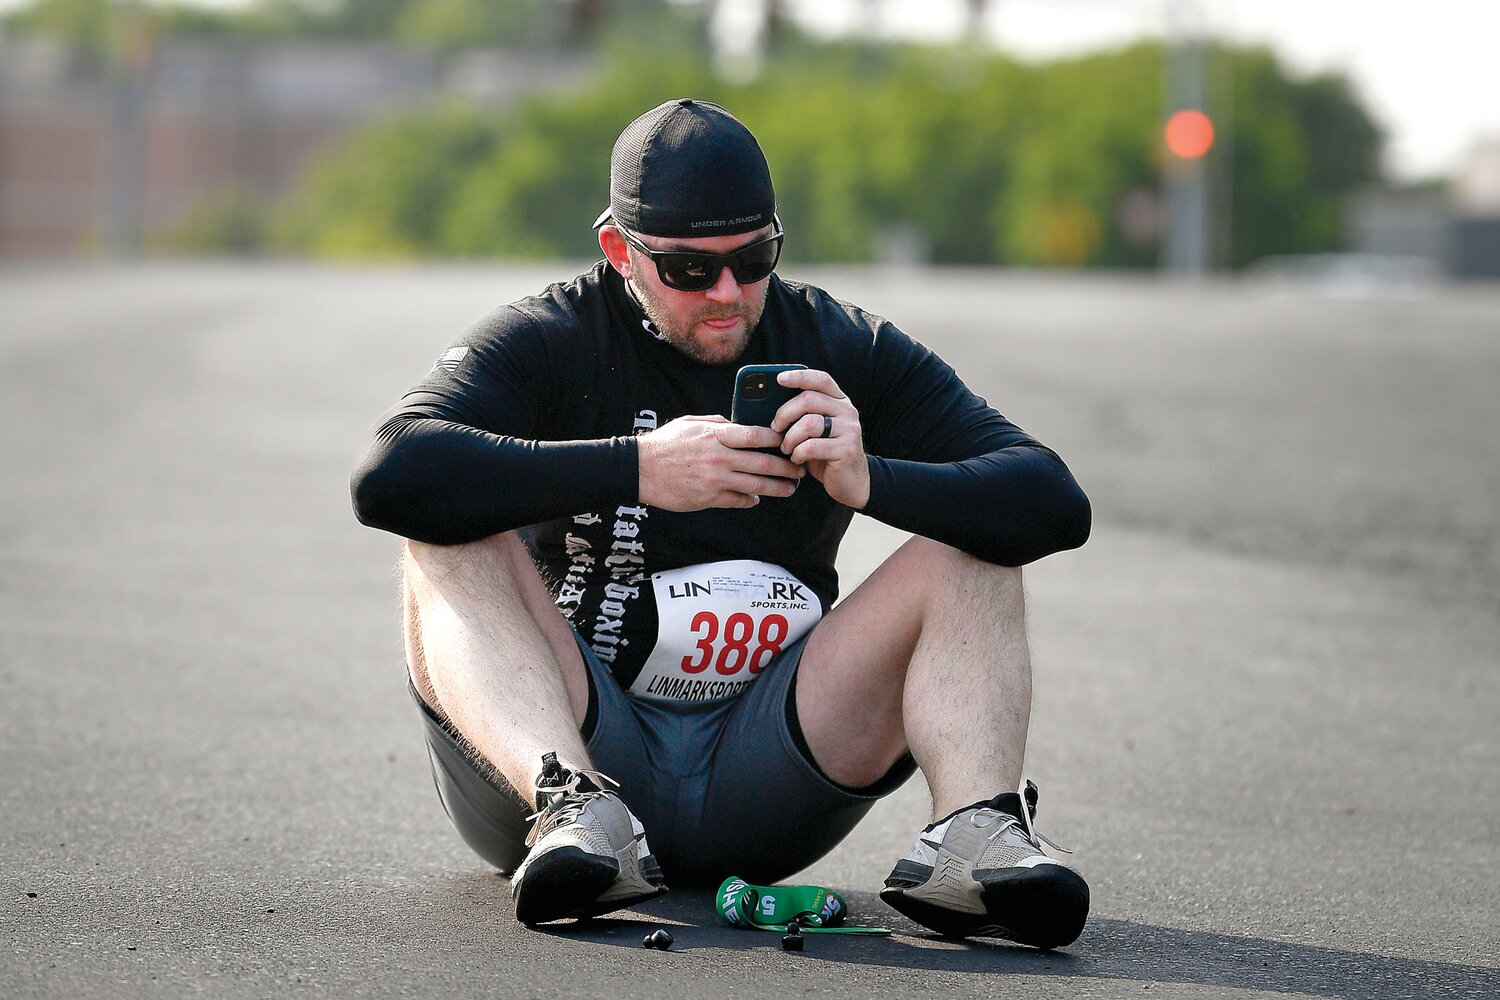 Tom Karas of Warminster checks the real-time results after finishing the 5K in 27:40.